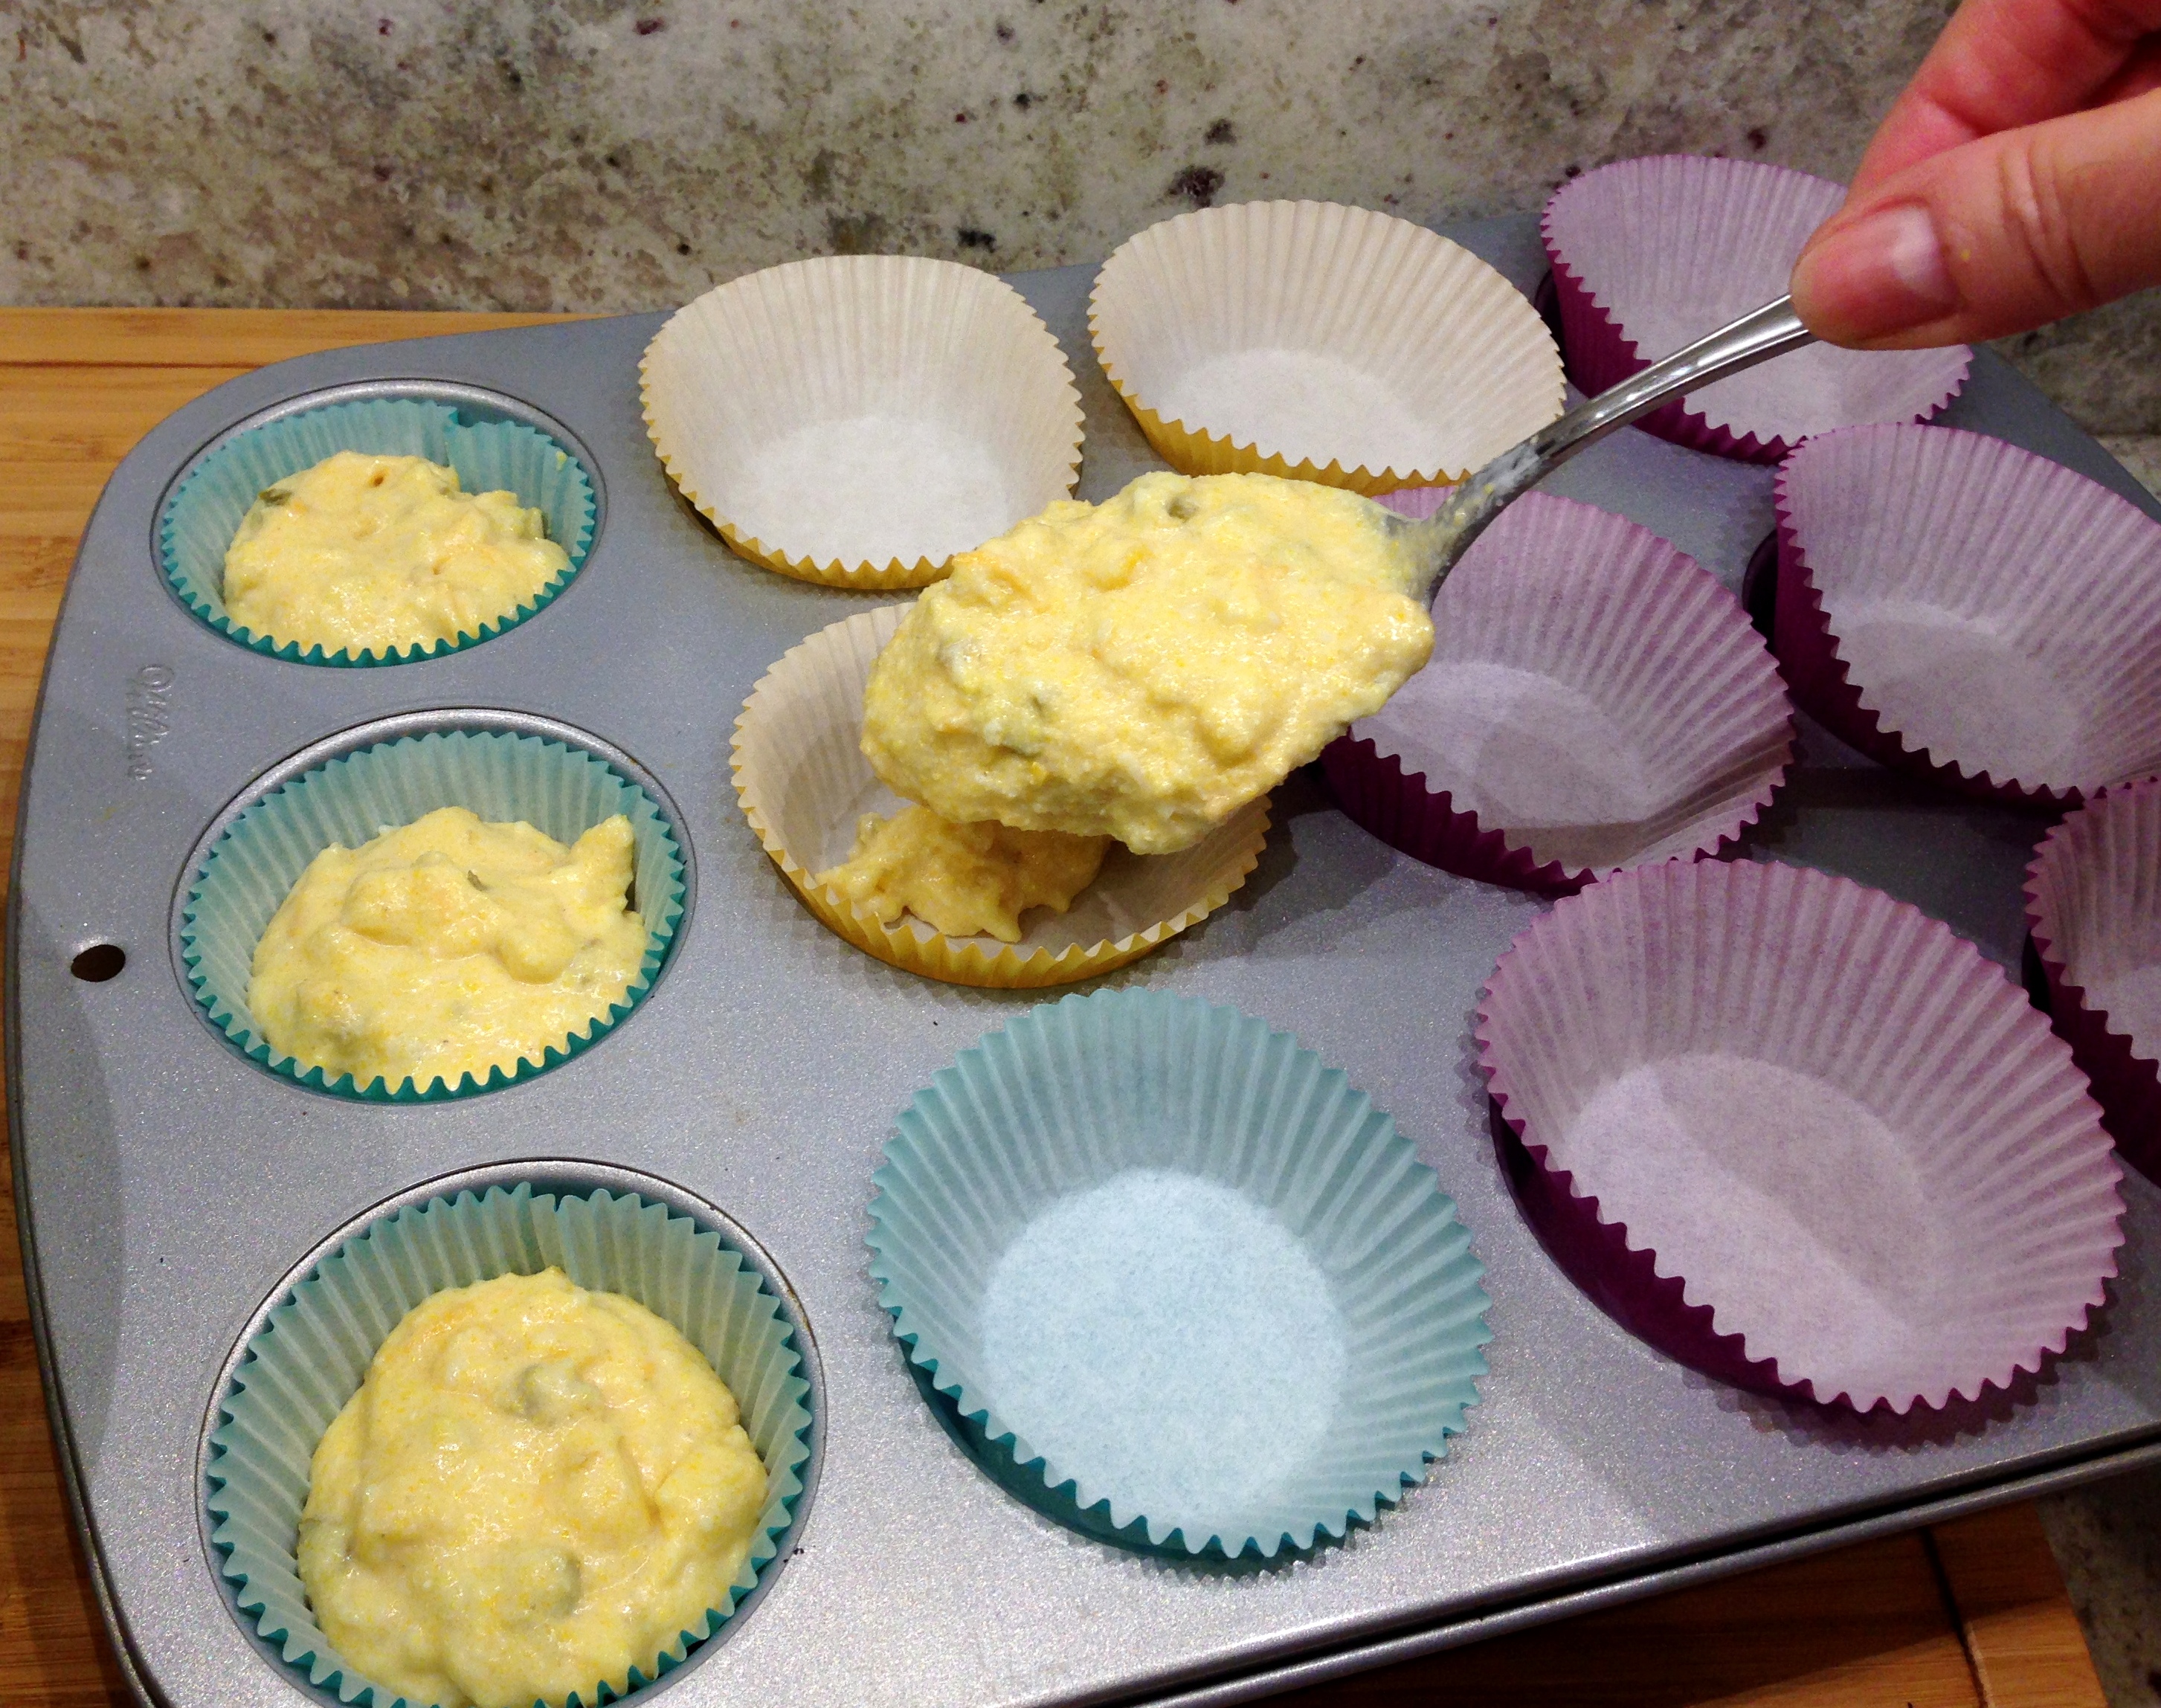 Spoon into muffin tins